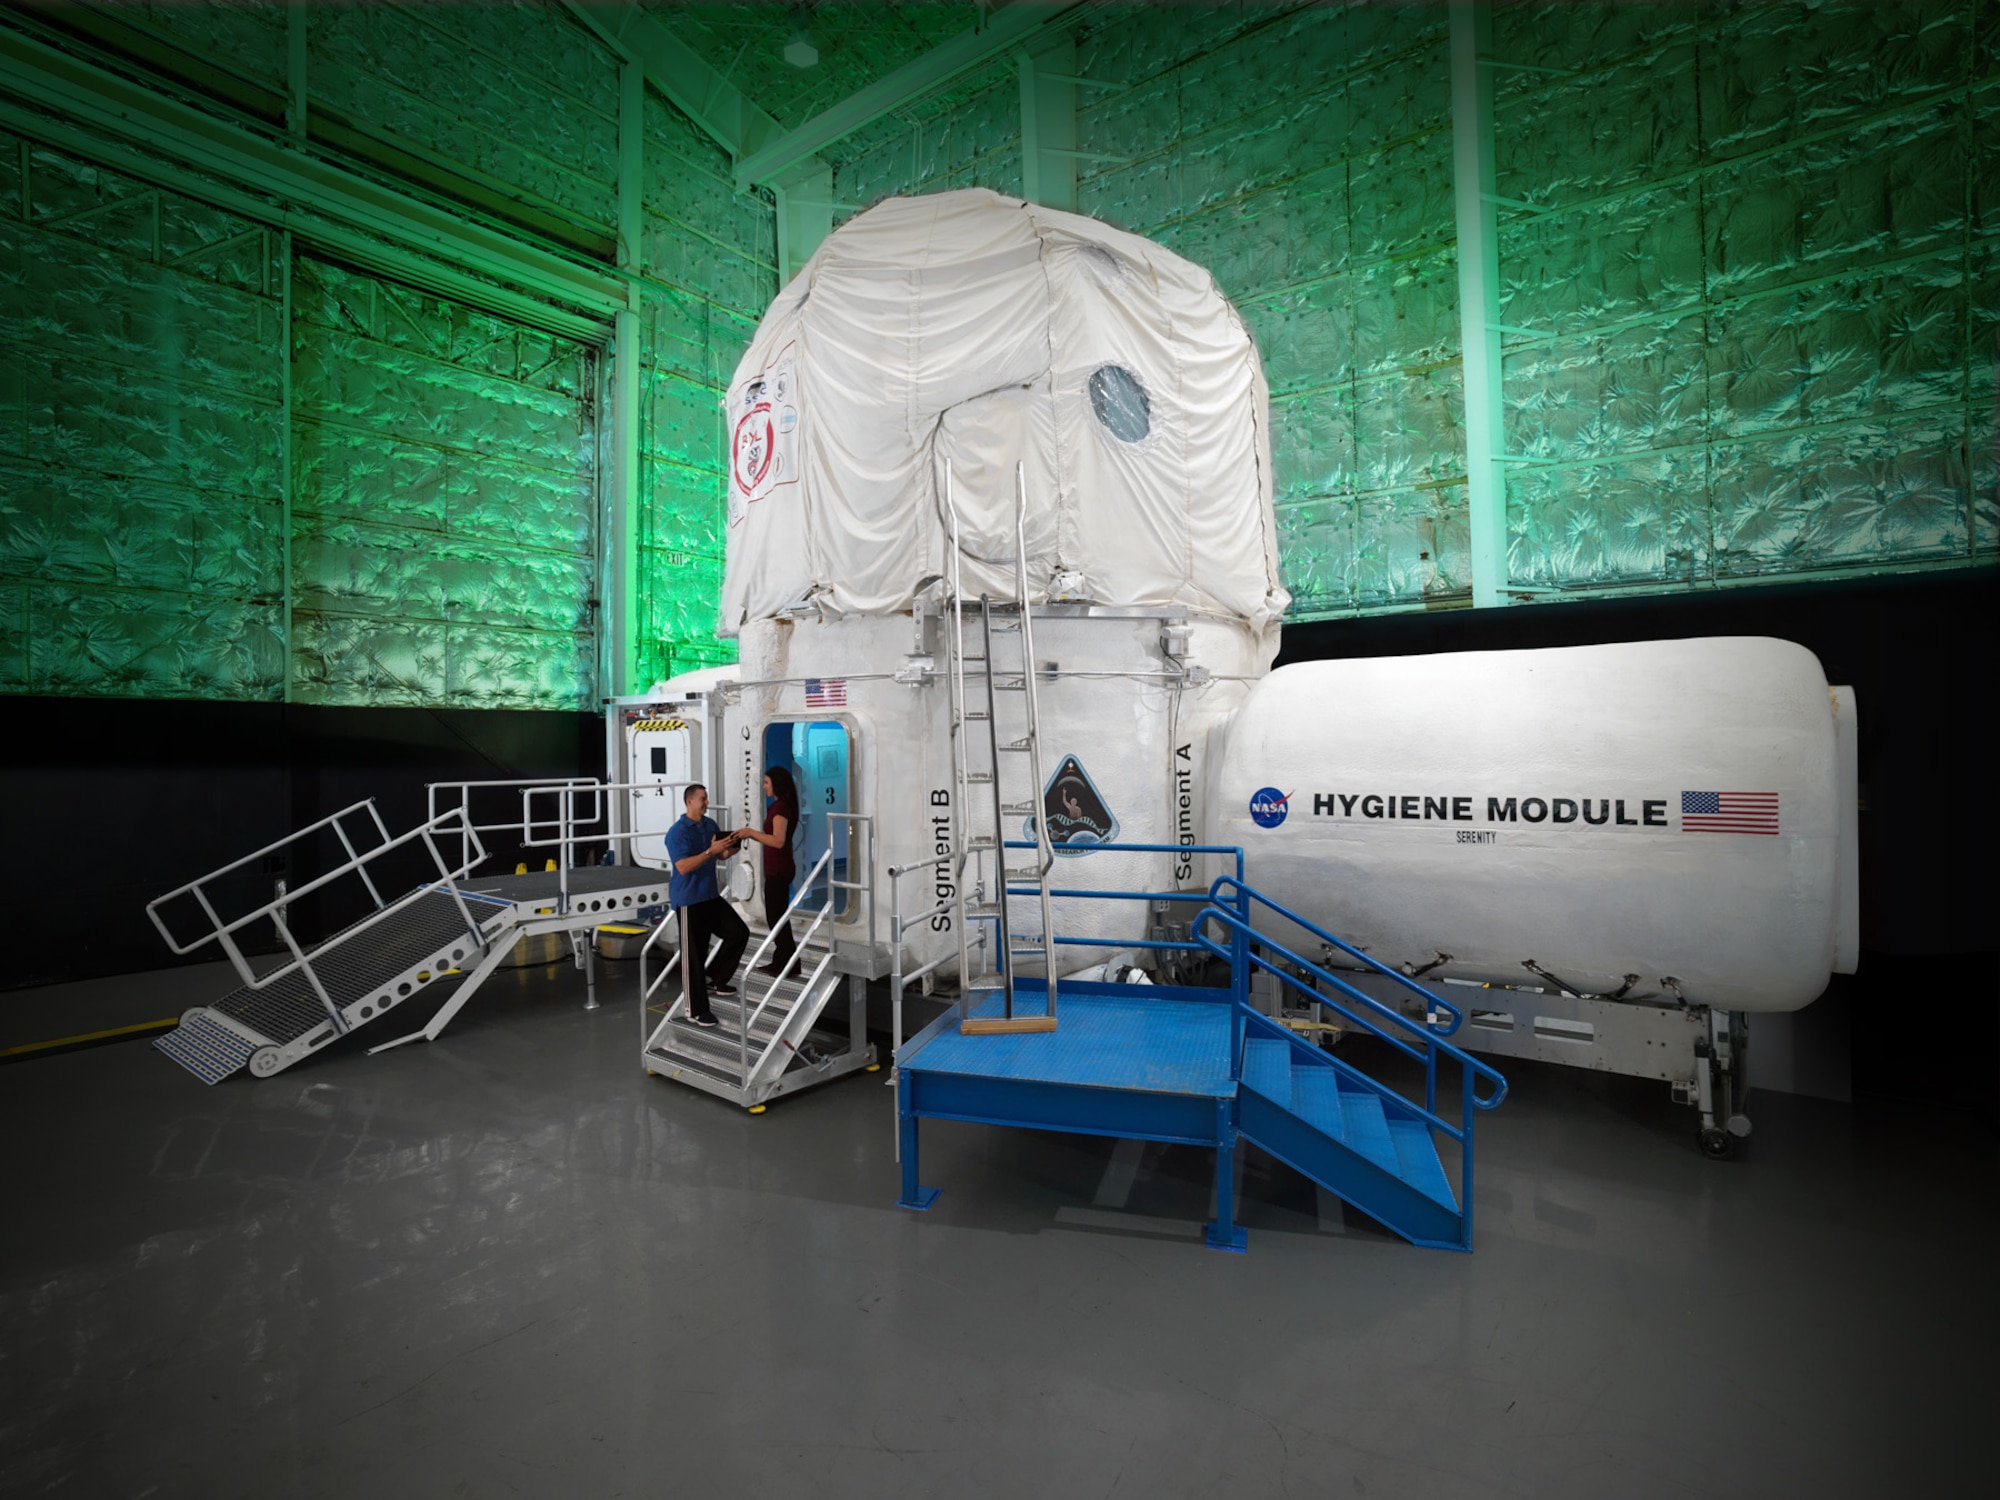 The Human Exploration Research Analog (HERA) is shown here at the Johnson Space Center, Texas. This modular three-story habitat was designed and created through a series of university competitions. The HERA serves as an analog for simulation of isolation, confinement and remote conditions of mission exploration scenarios. Westwood Middle School students in Manchester recently spoke with crew members on the HERA X mission by phone, which was made possible by the AEDC STEM Center coordinator, Jerry Matty. (NASA Photo)